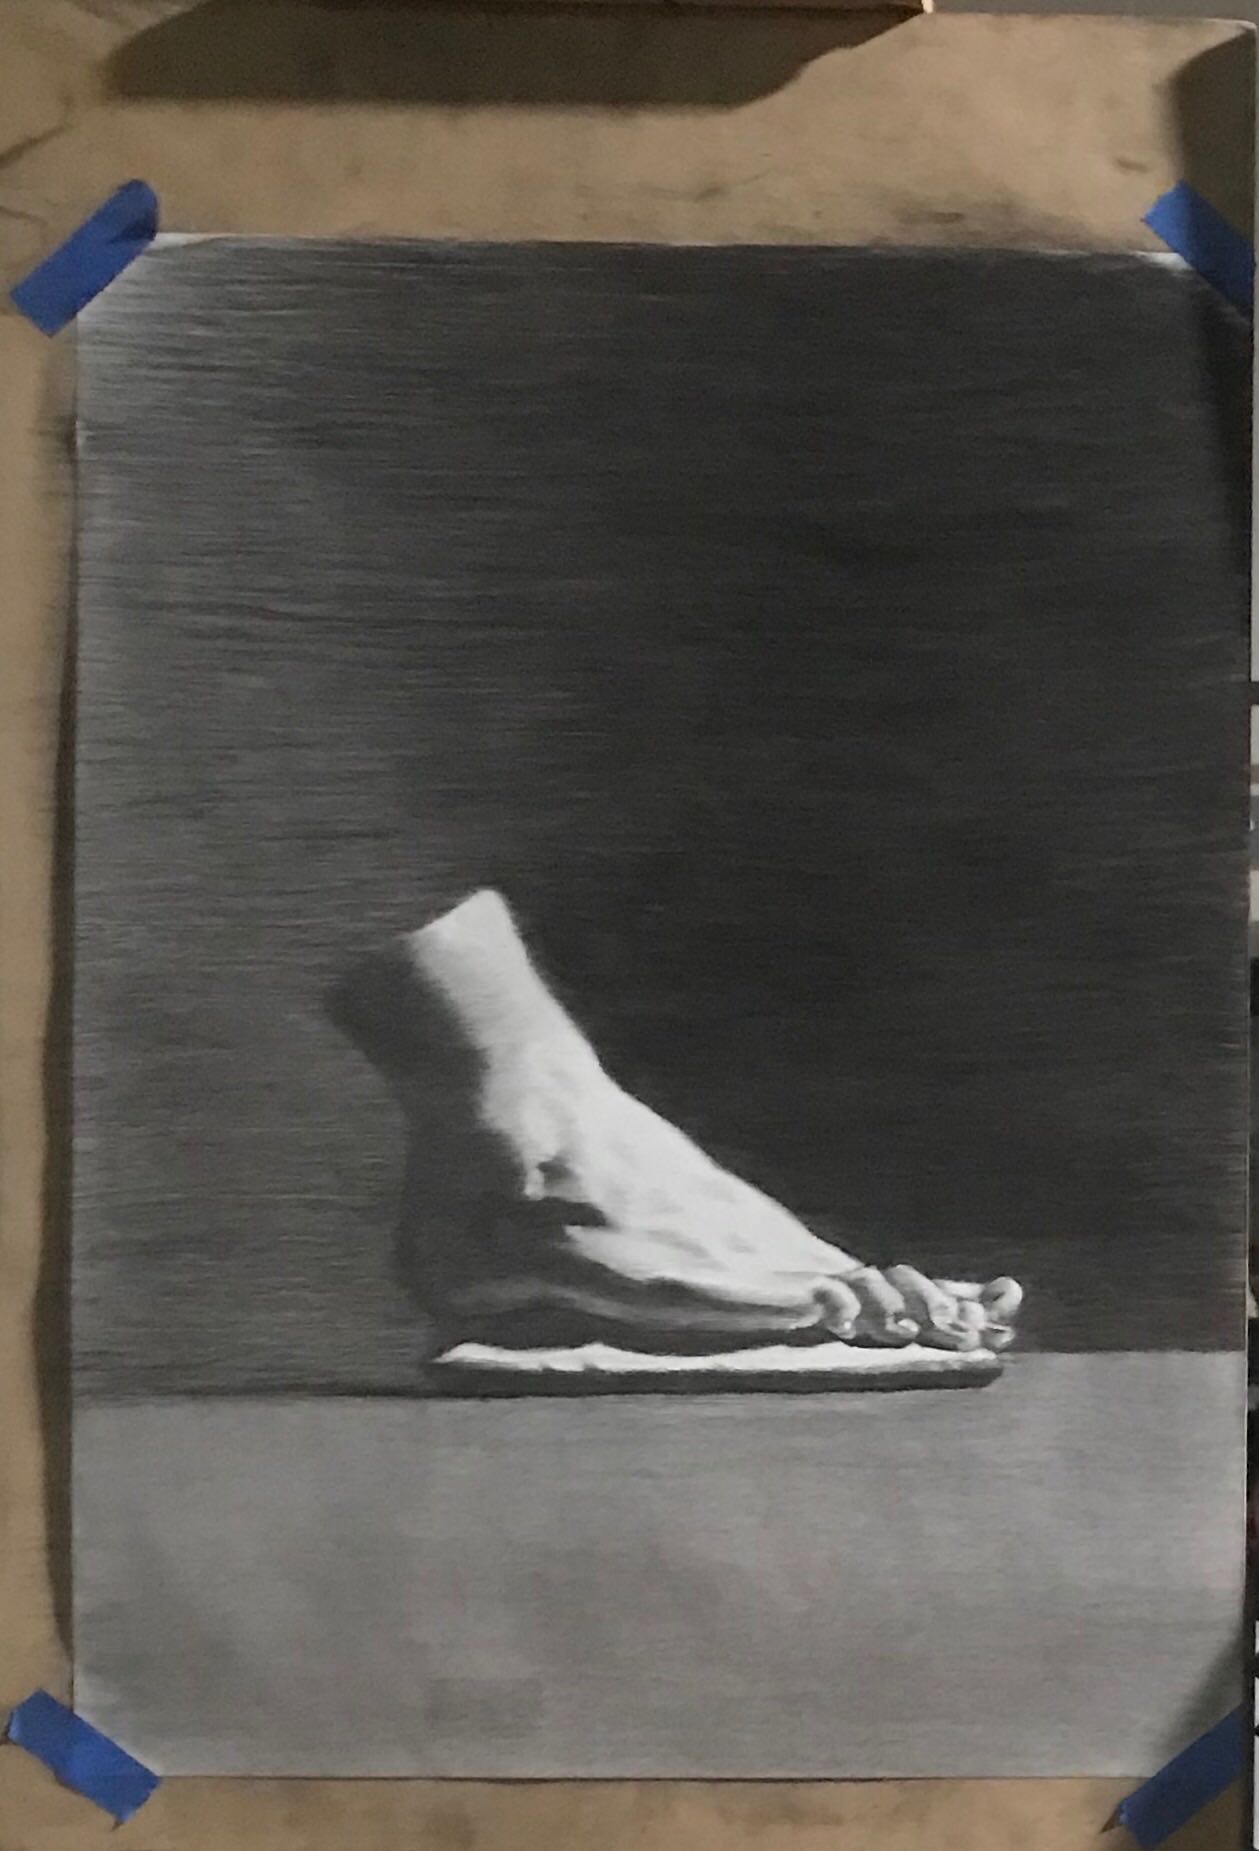 Drawing the feet